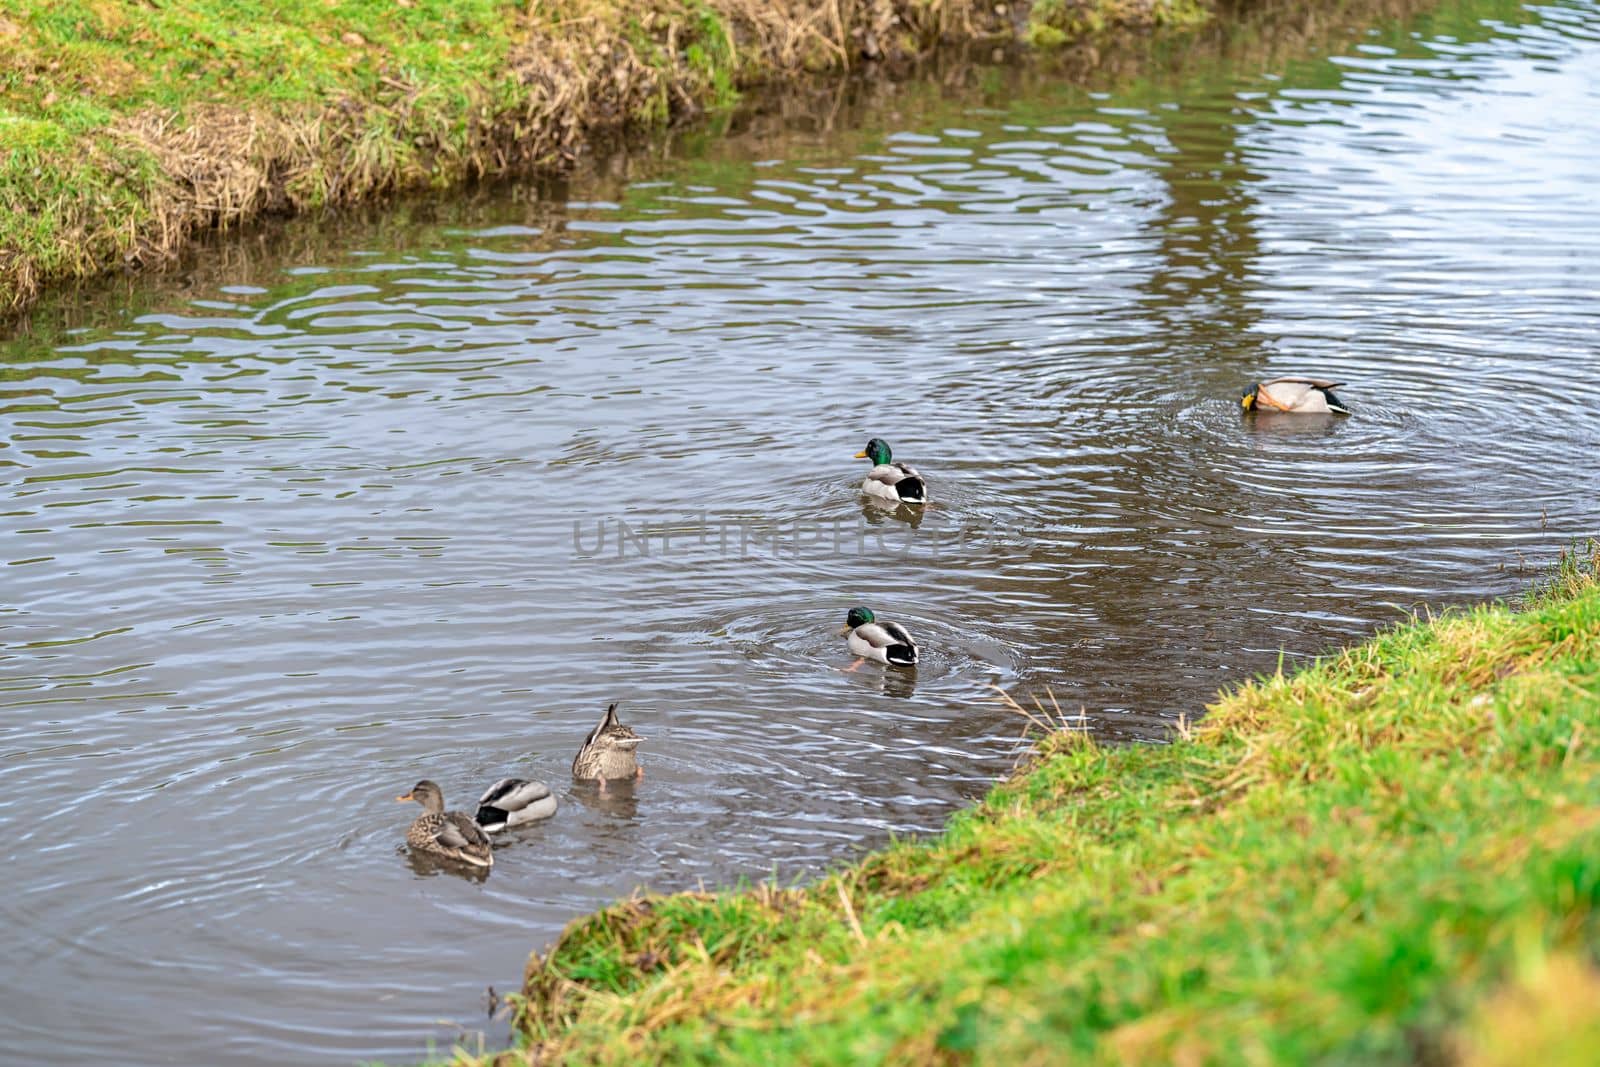 wild ducks in the river. High quality photo